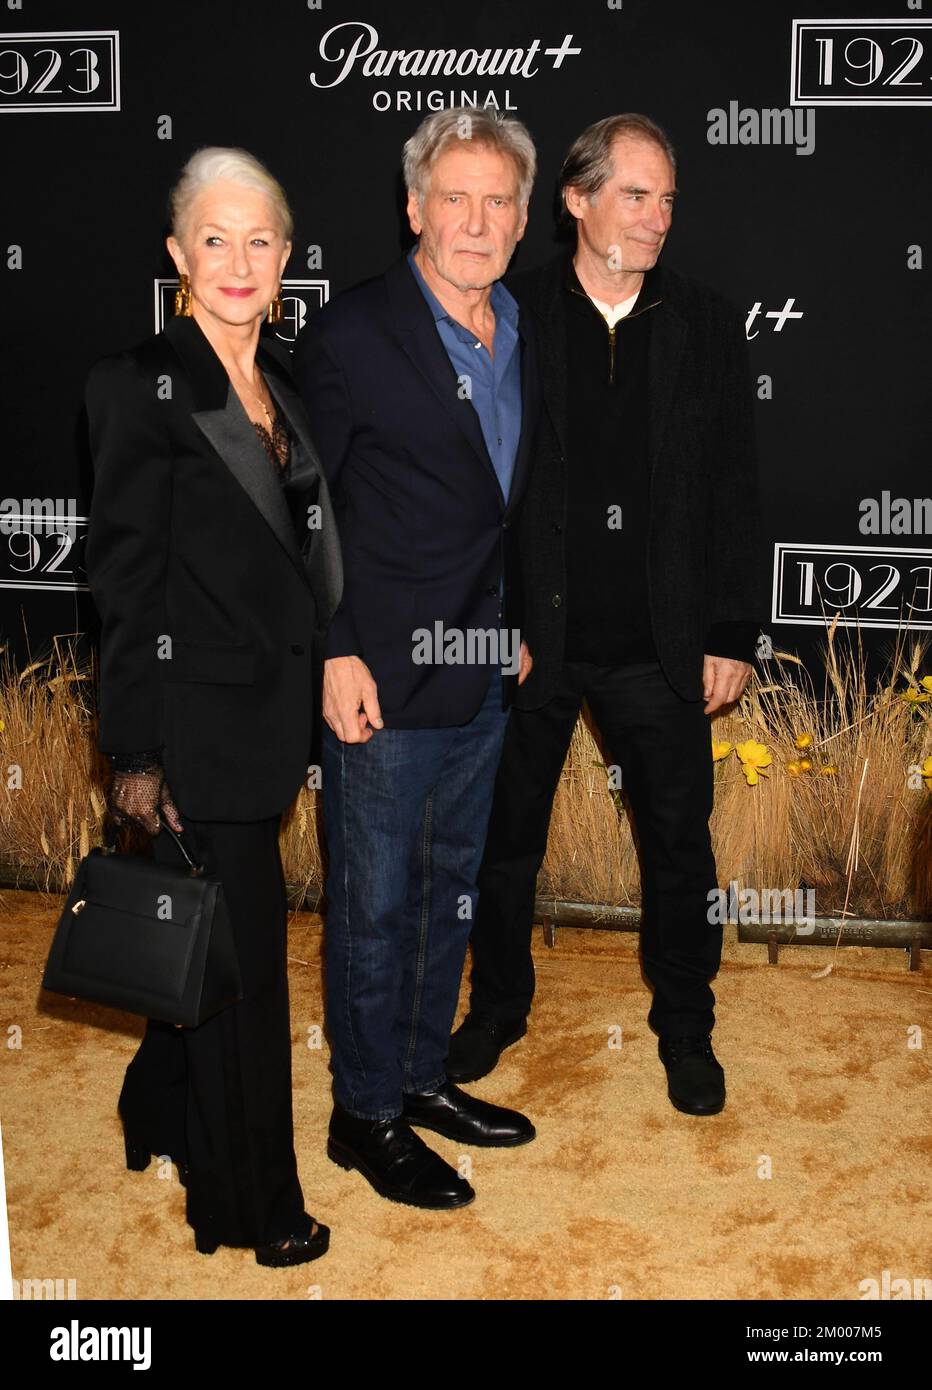 LOS ANGELES, CALIFORNIA - DECEMBER 02: (L-R) Helen Mirren, Harrison Ford and Timothy Dalton attend the Los Angeles Premiere Of Paramount+'s '1923' at Stock Photo